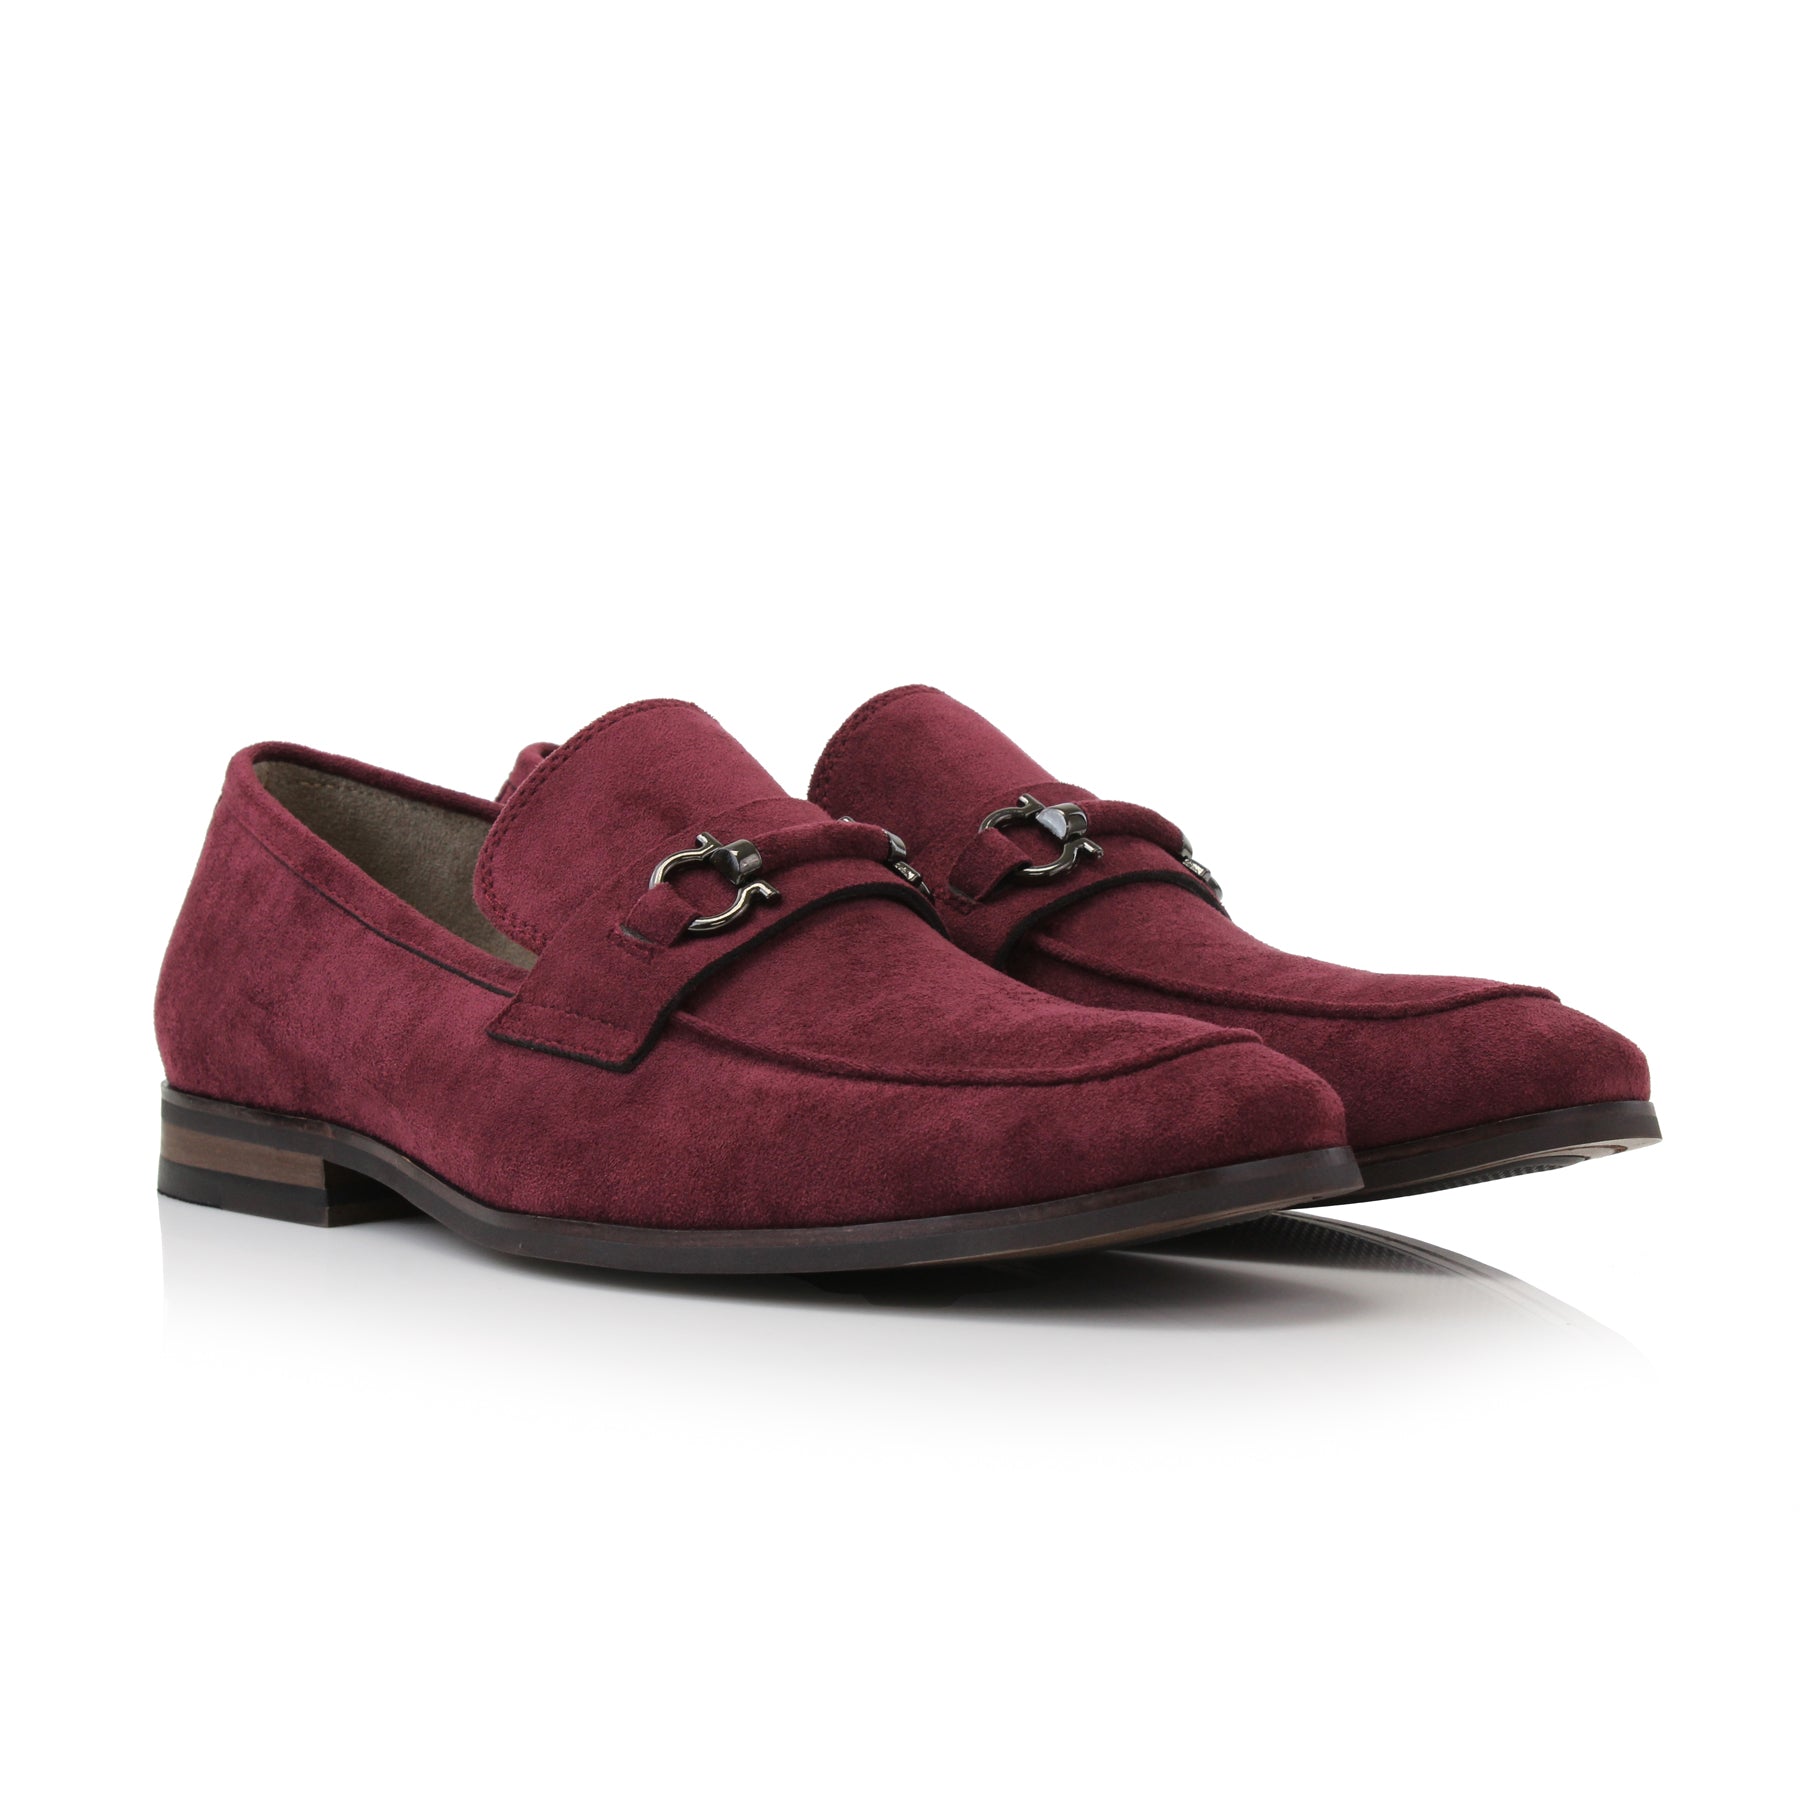 Metal Buckle Suede Loafers | Demitri by Ferro Aldo | Conal Footwear | Paired Angle View